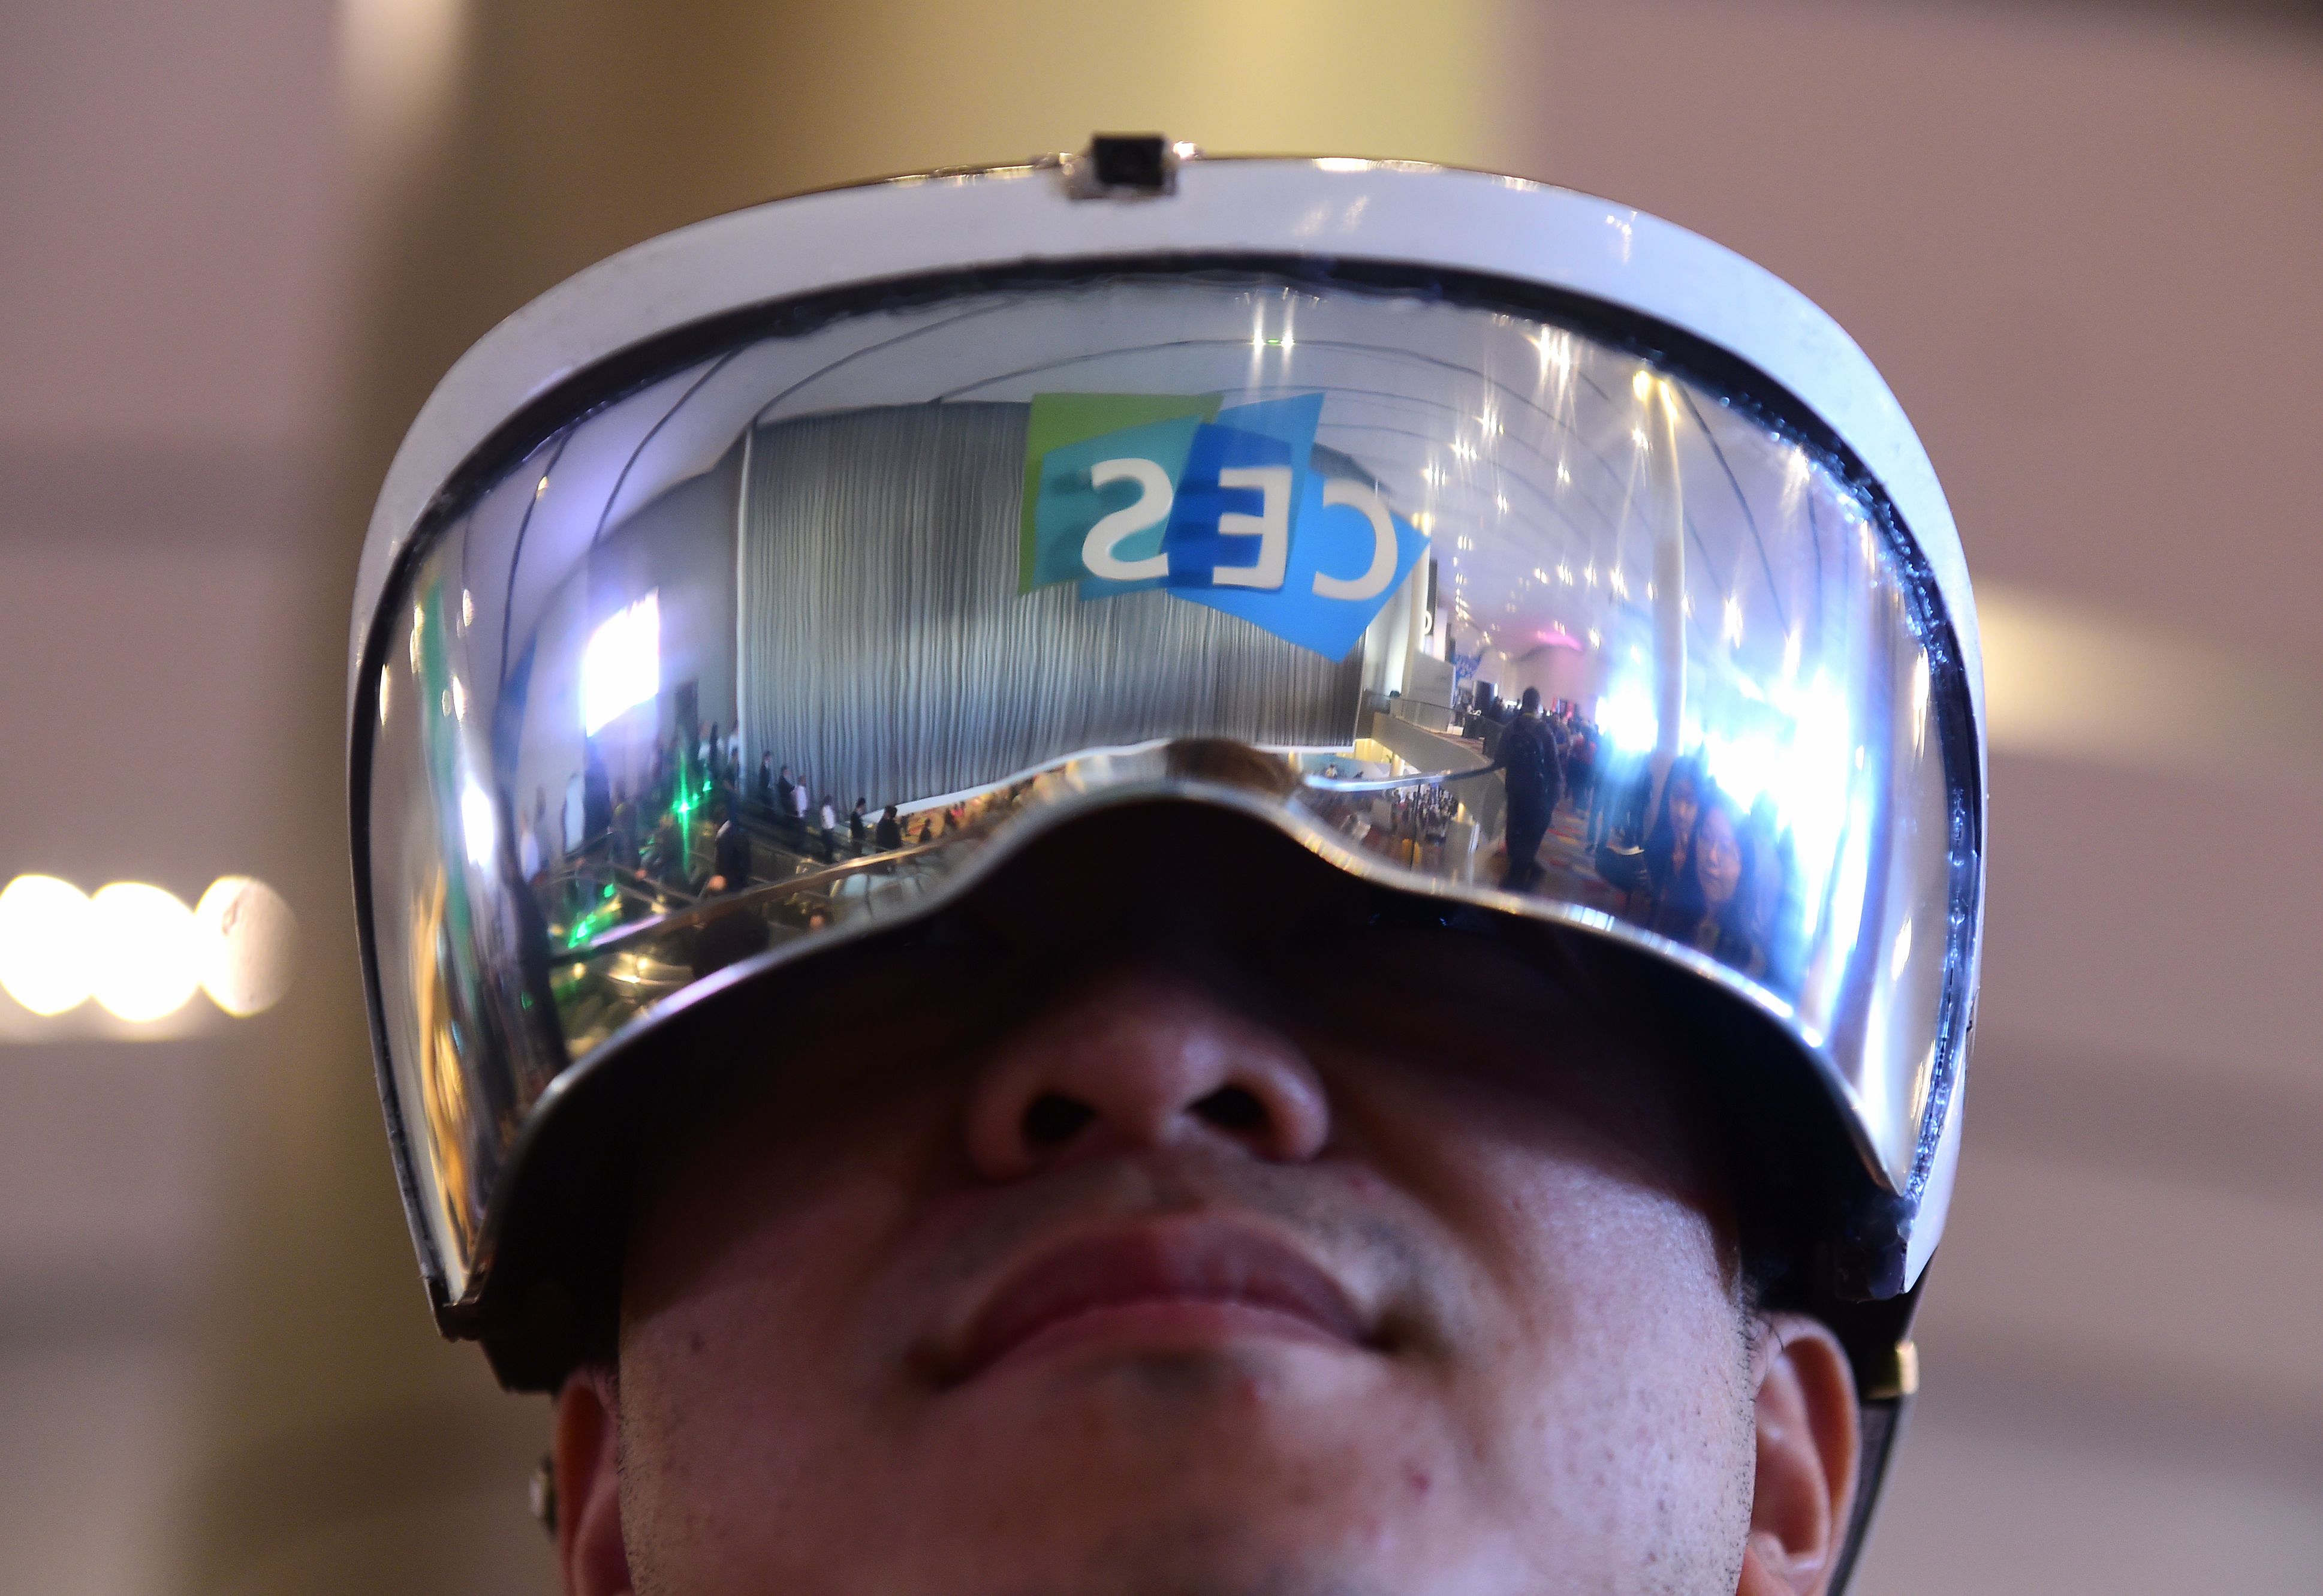 Attendee Wei Rongjie wears a working prototype of his HoloSeer AR/VR all-in-one agumented reality and virtual reality headseat, January 6, 2016 at the CES 2016 Consumer Electronics Show in Las Vegas, Nevada. (Robyn BeckK—AFP/Getty Images)